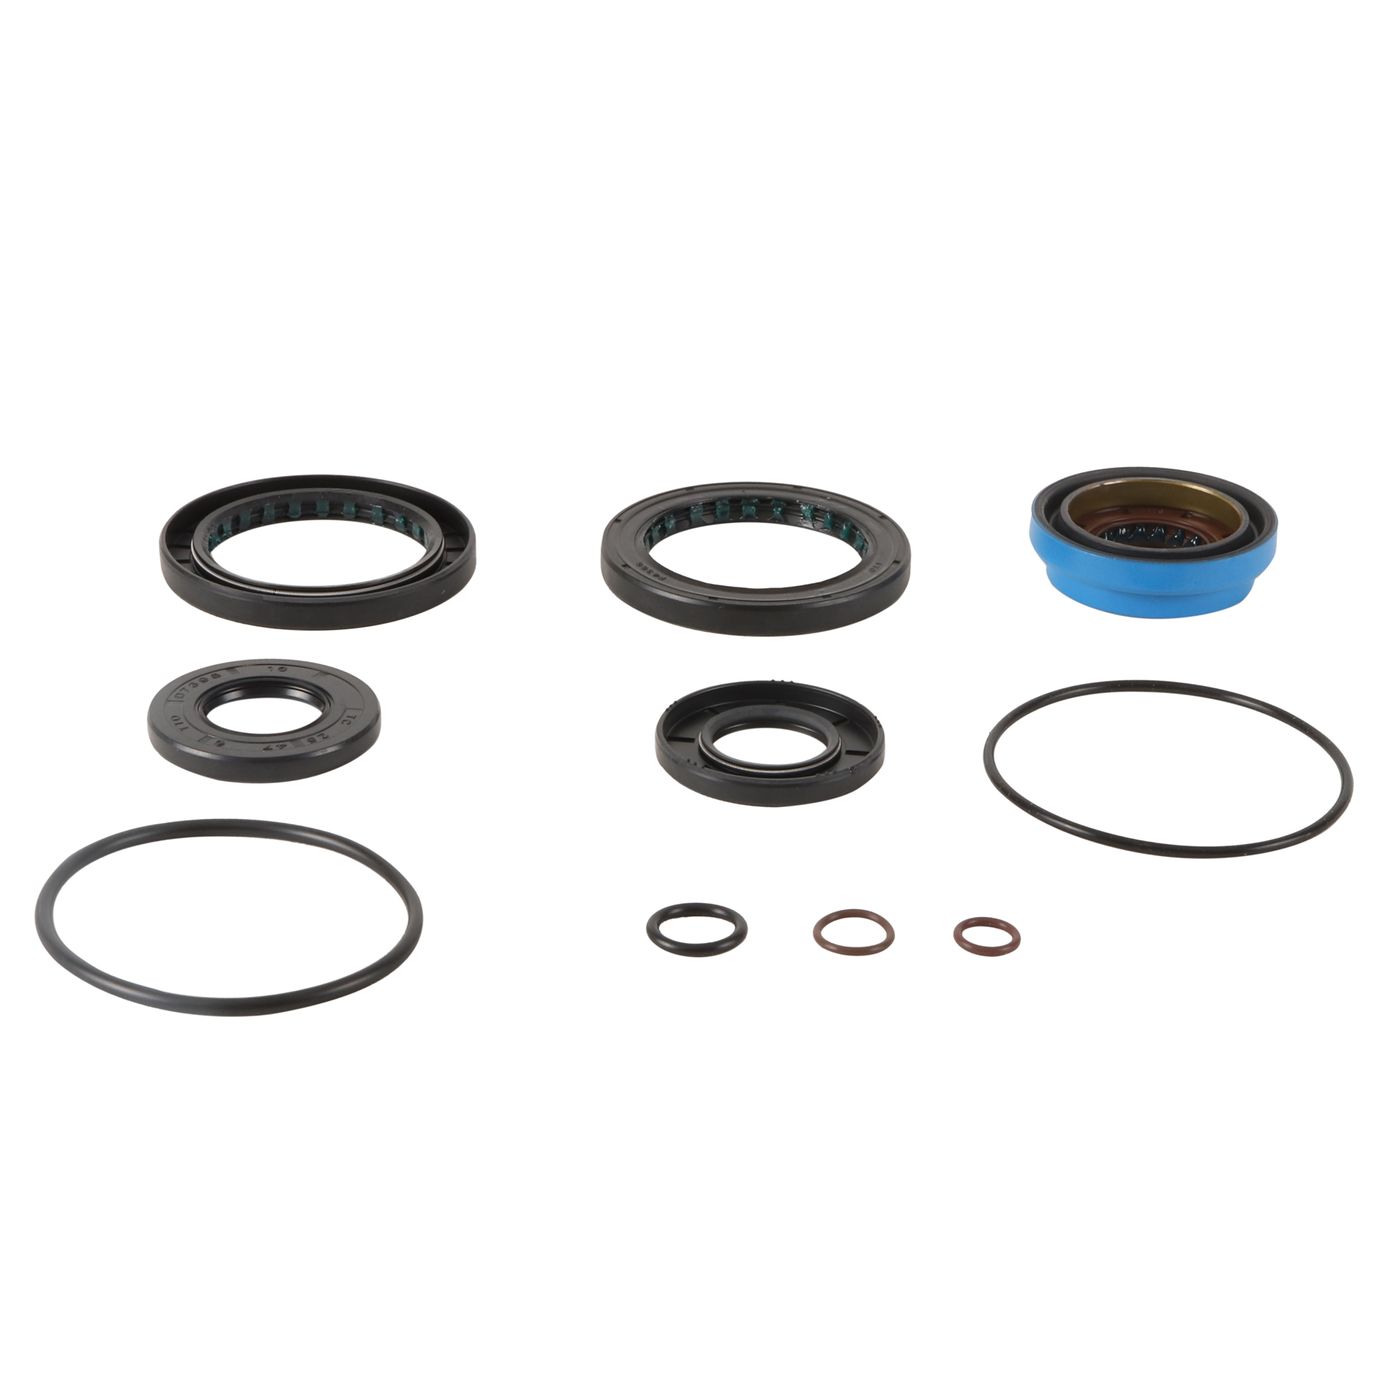 Wrp Diff Seal Kits - WRP252089-5 image